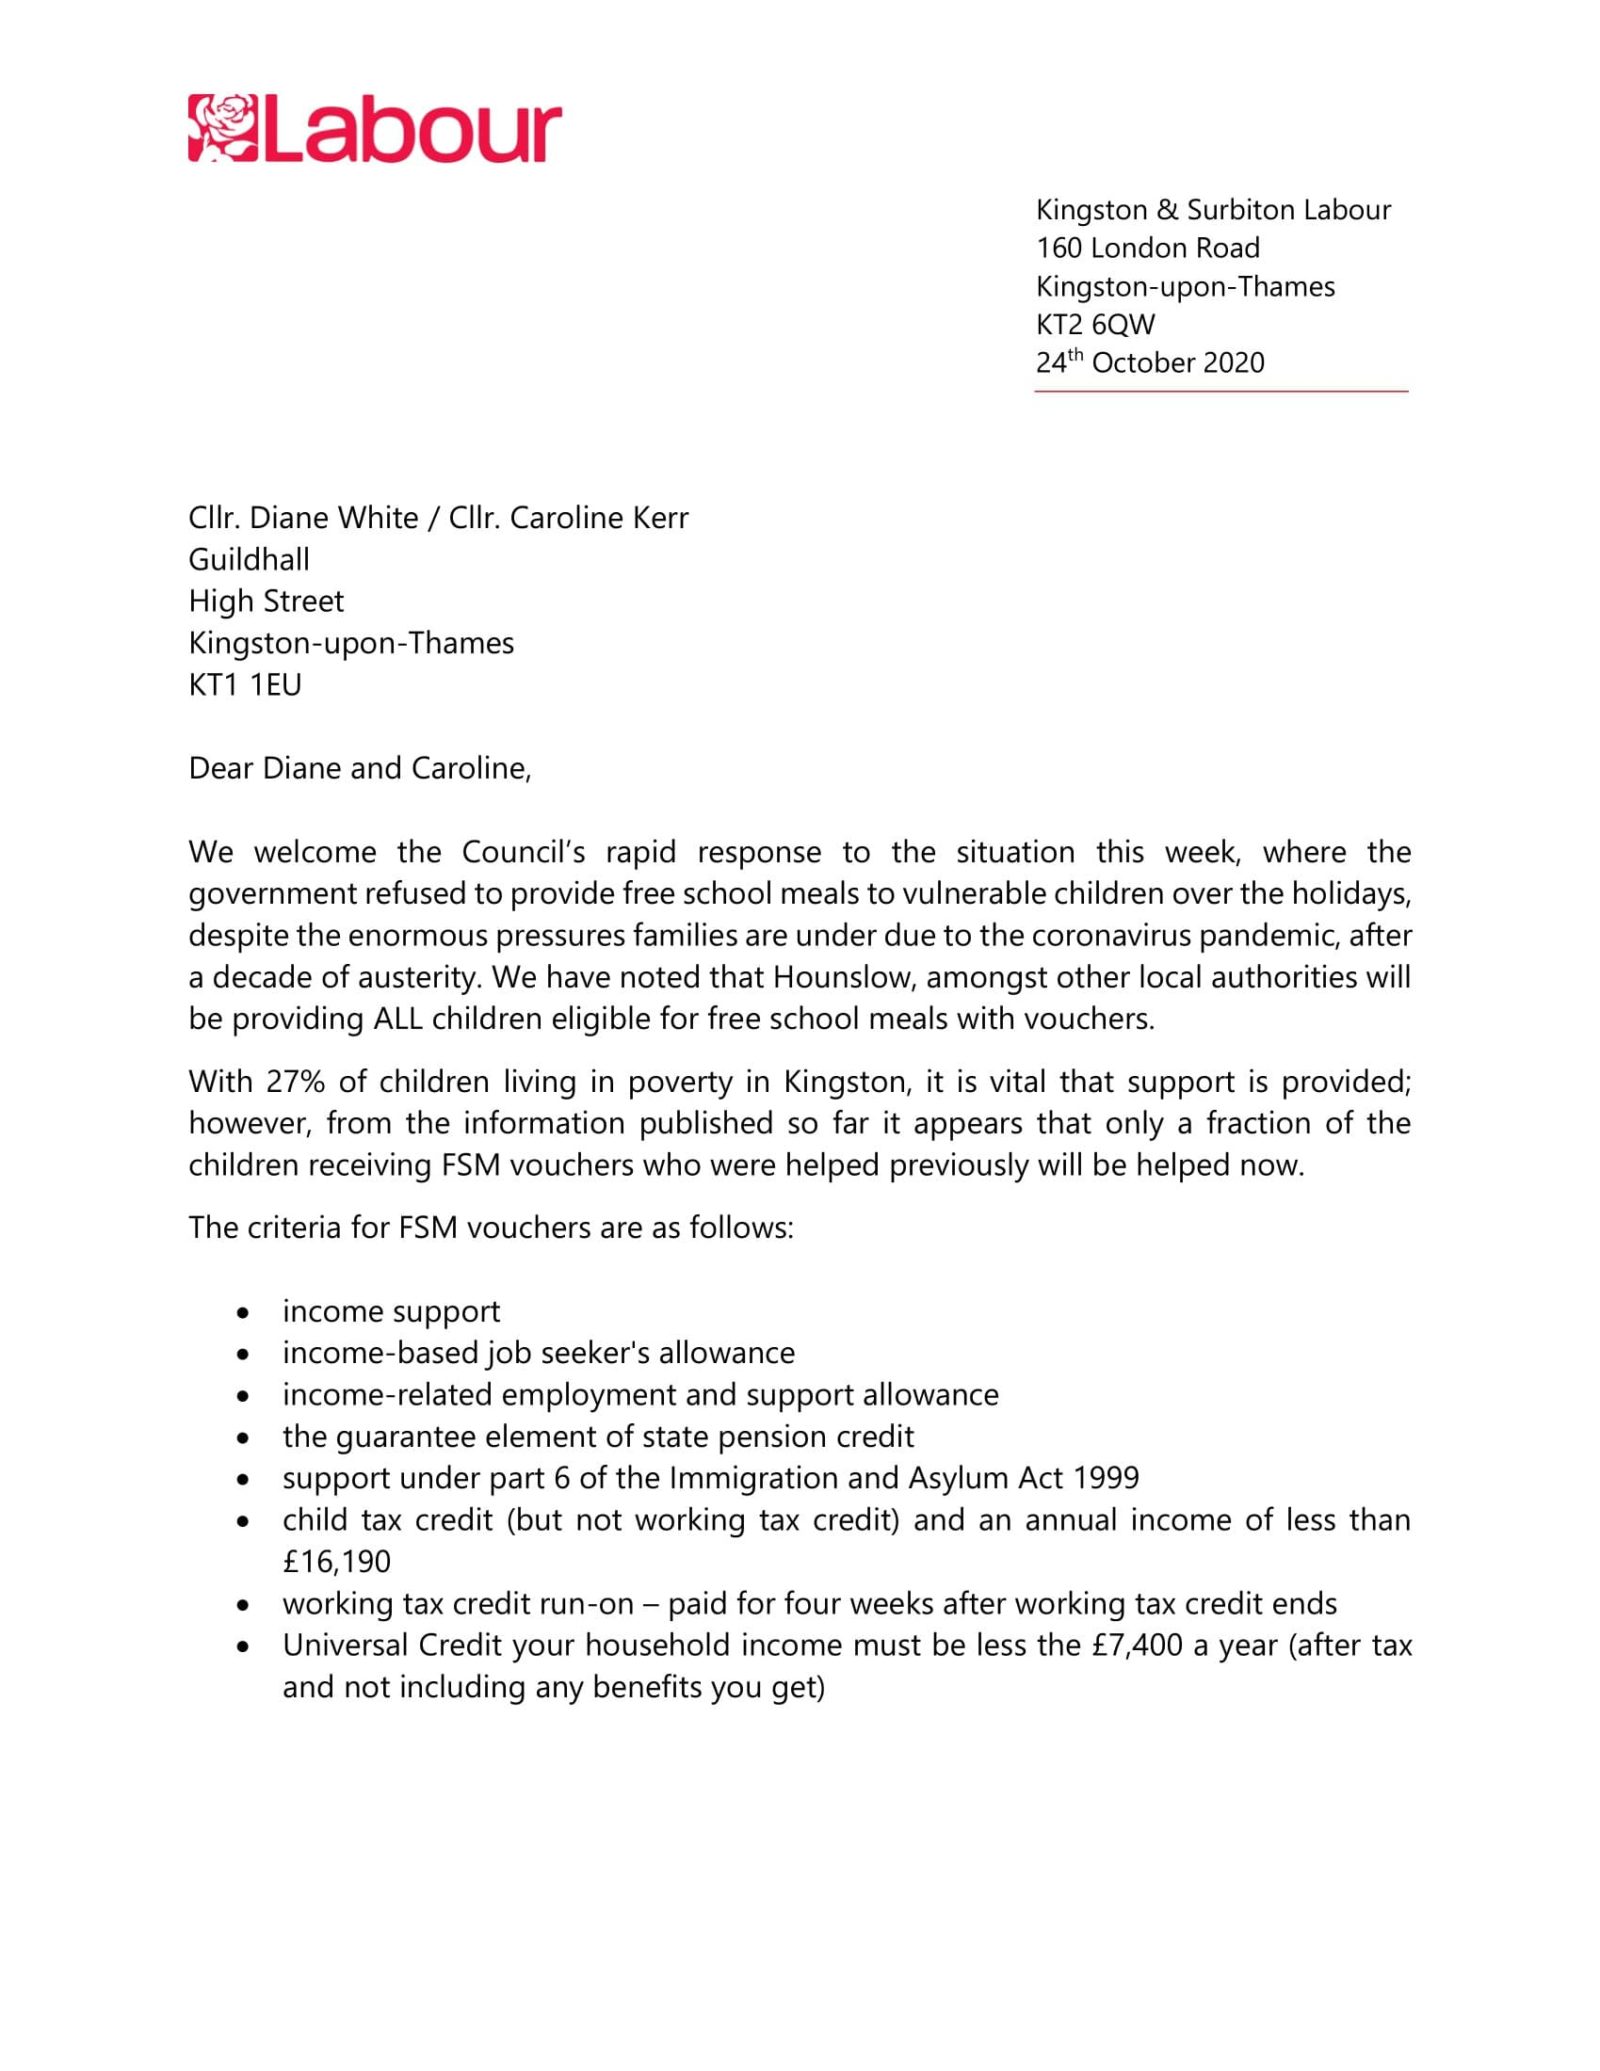 Letter to Kingston Council re FSM